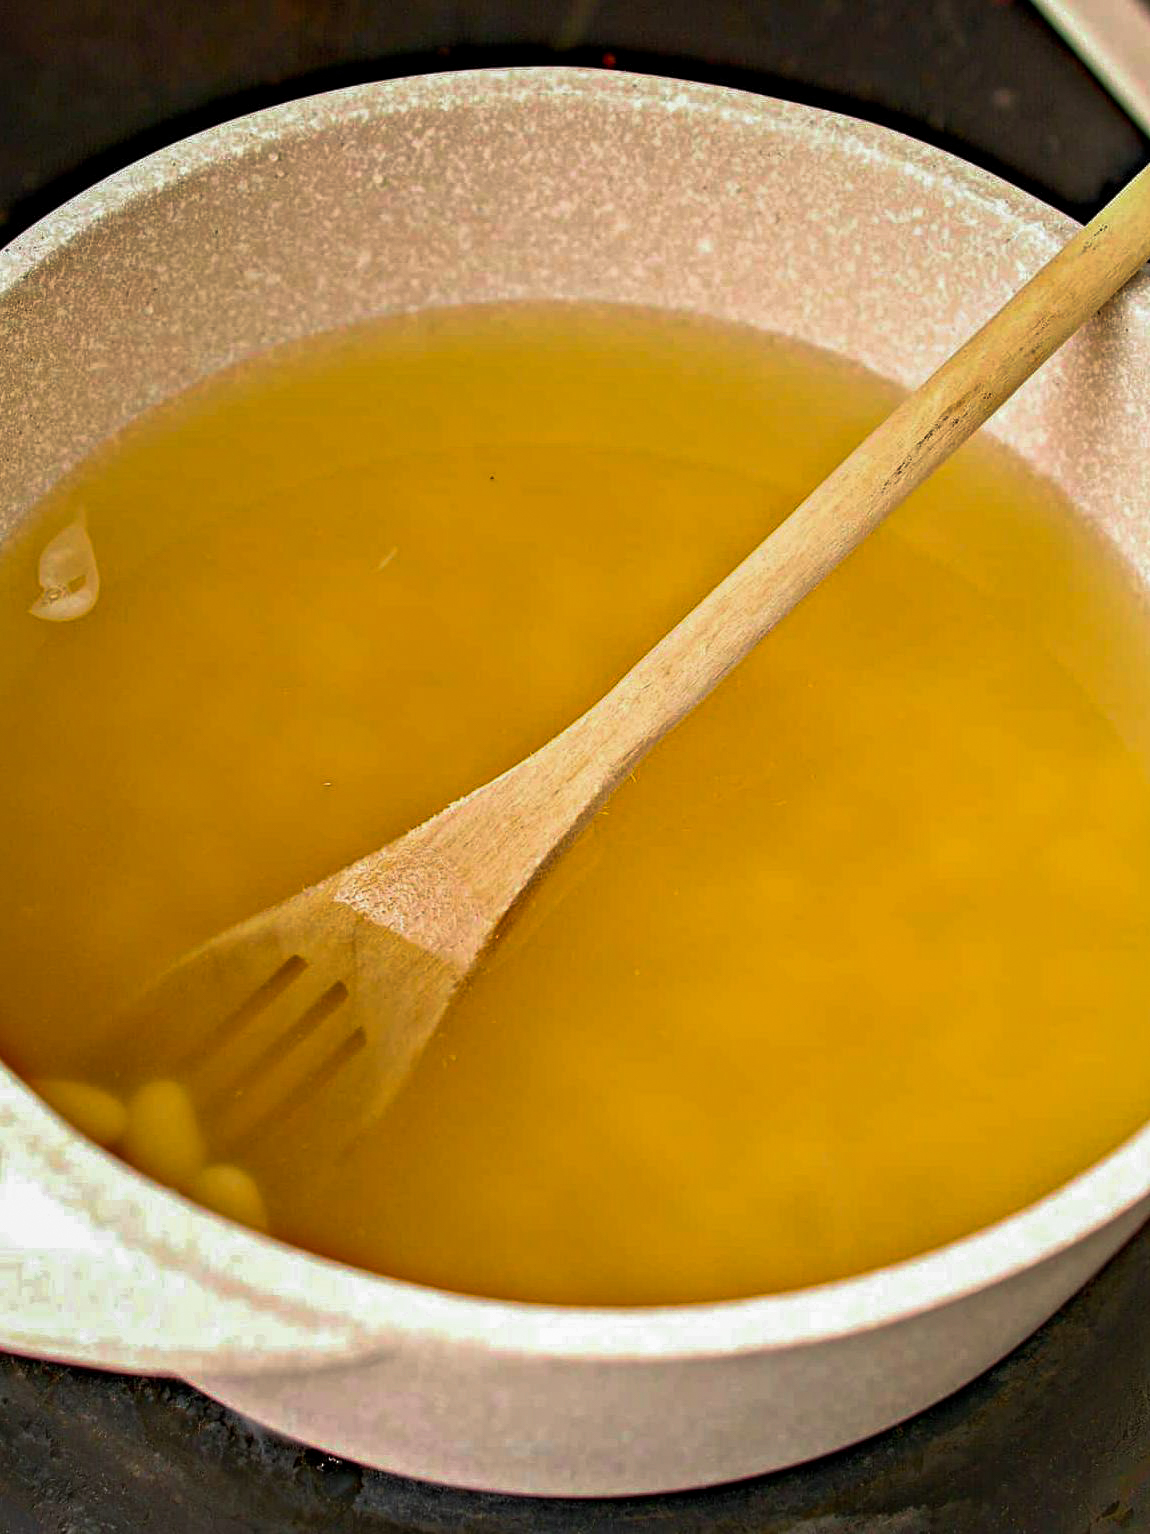 In a pot over medium-high heat on the stove, bring the chicken broth and can of beans to a boil.